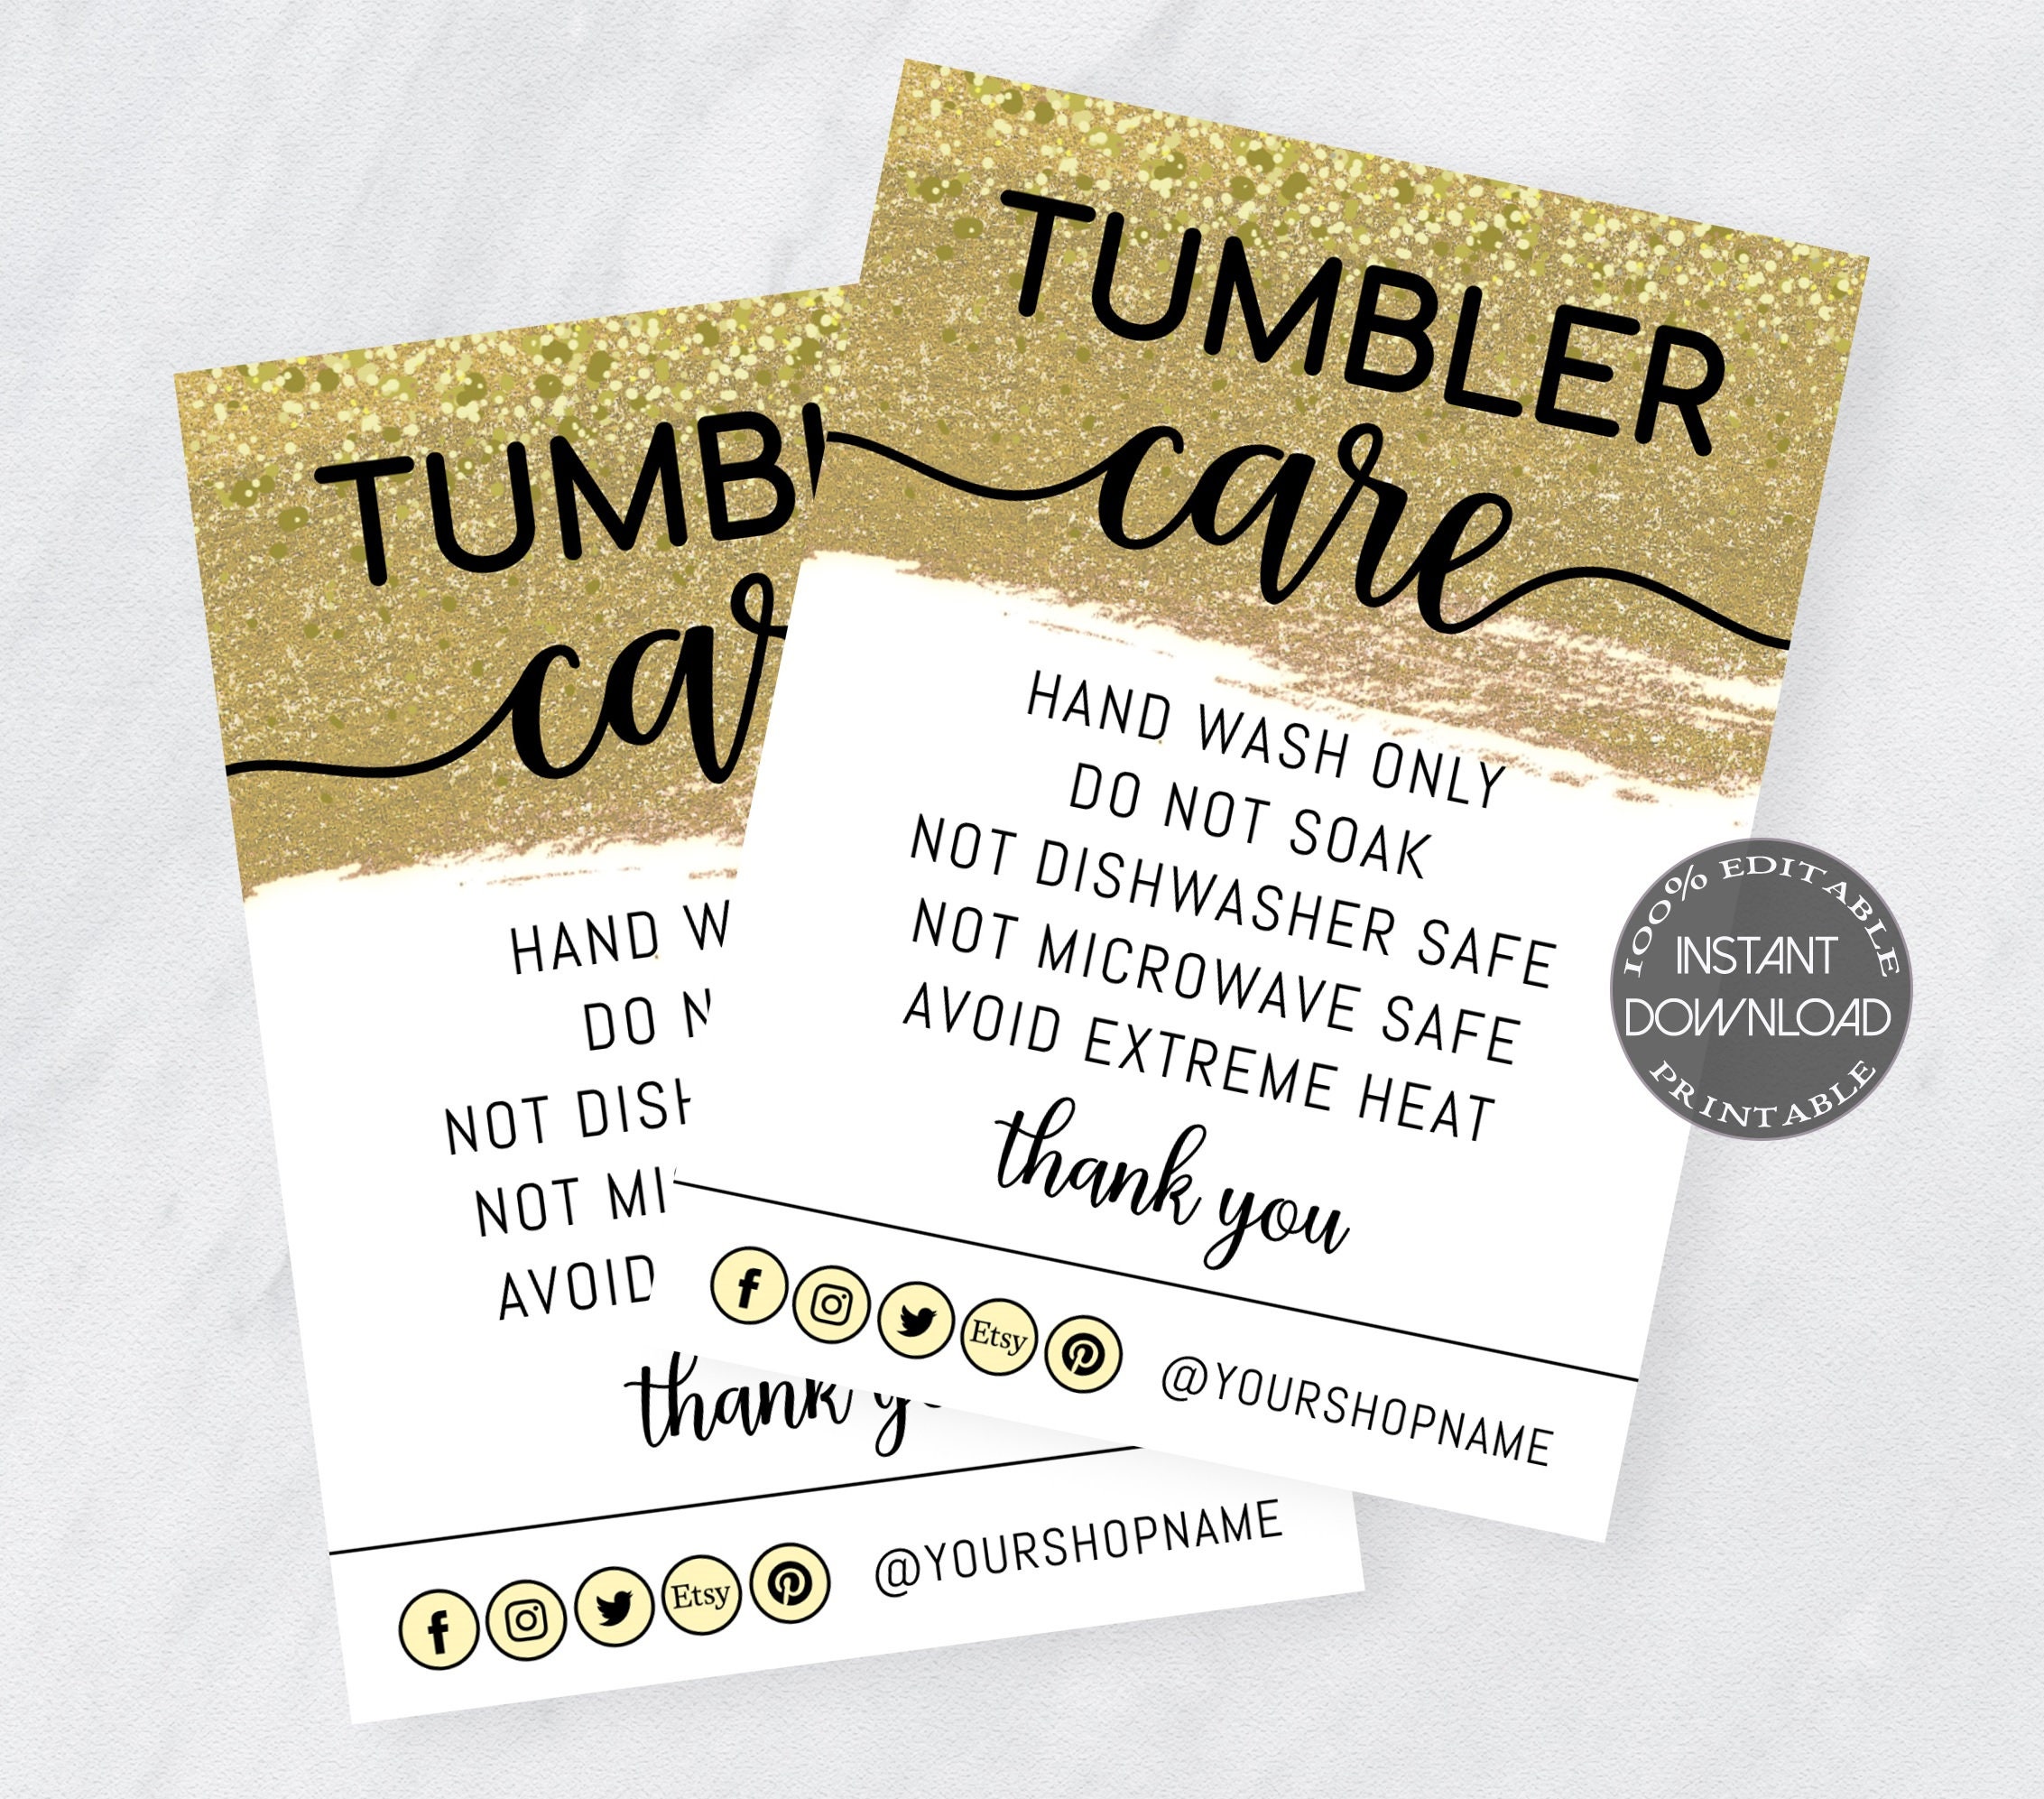 Small Business Inserts Tumbler Care Cards Template Etsy Shop Card Editable Care Instructions Printable Tumbler Instructions DTP-006